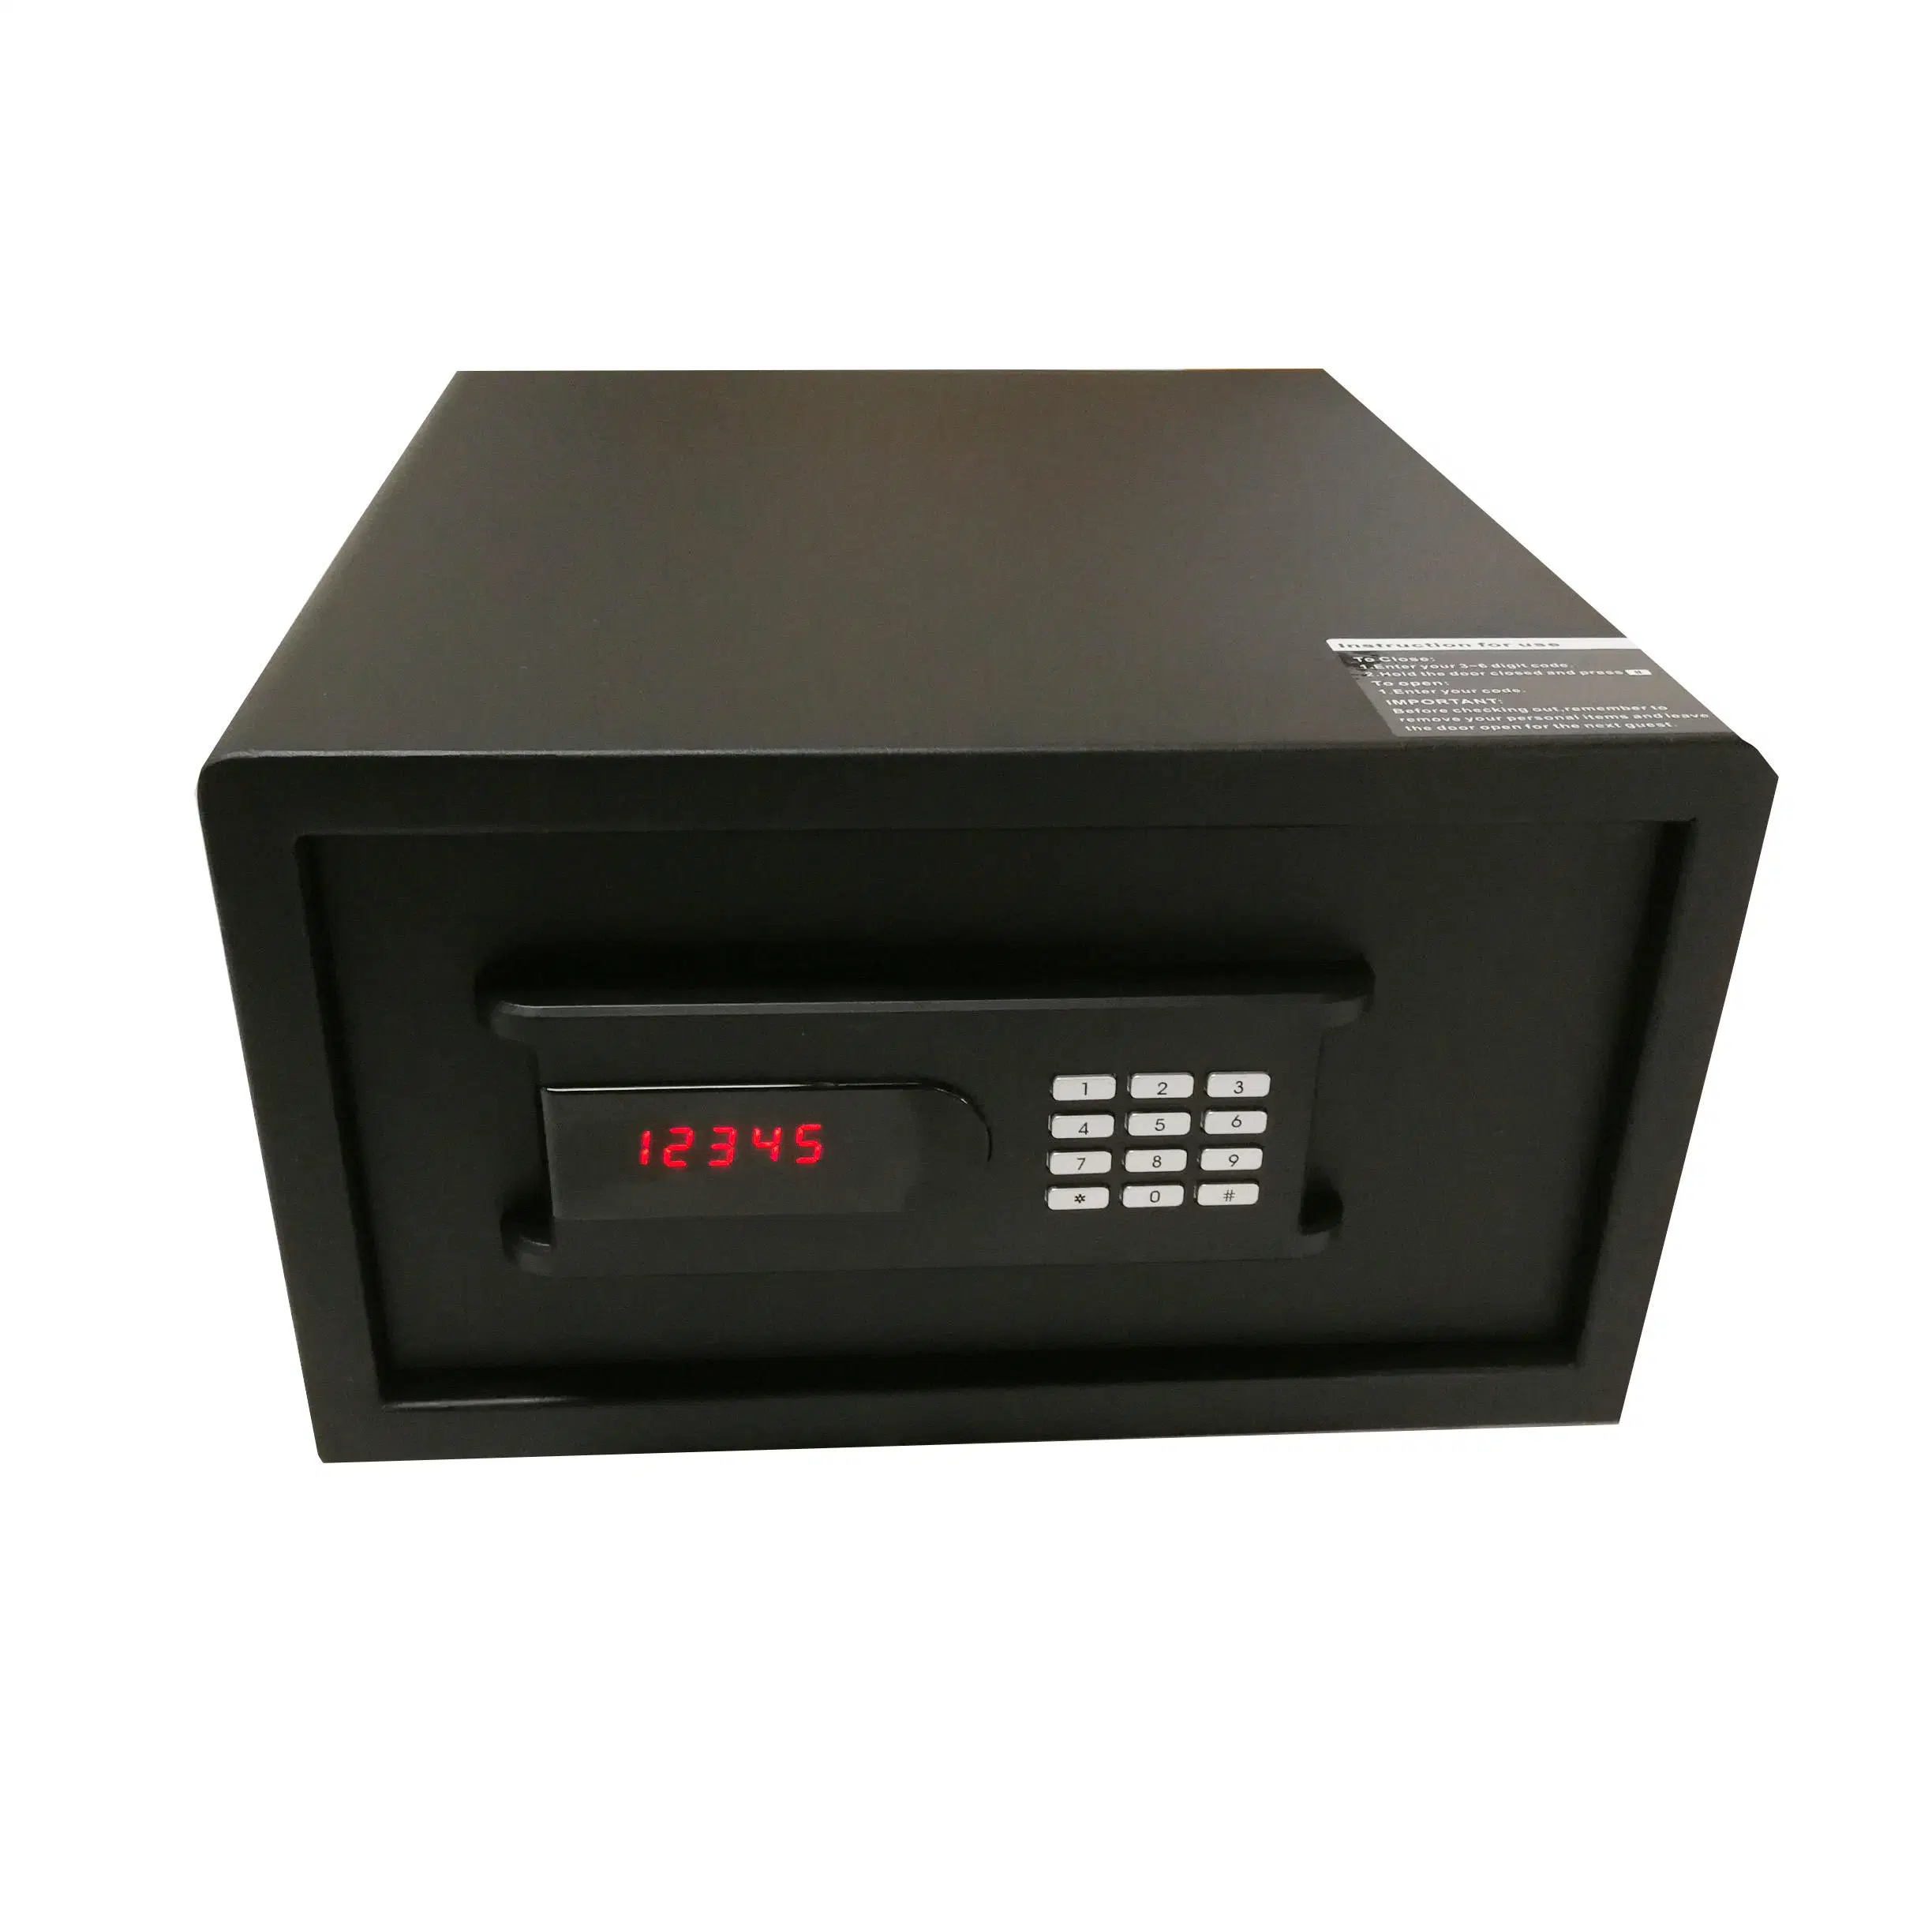 LCD Display Power Adapter with Digital Keypad Safe Box for Household and Hotel